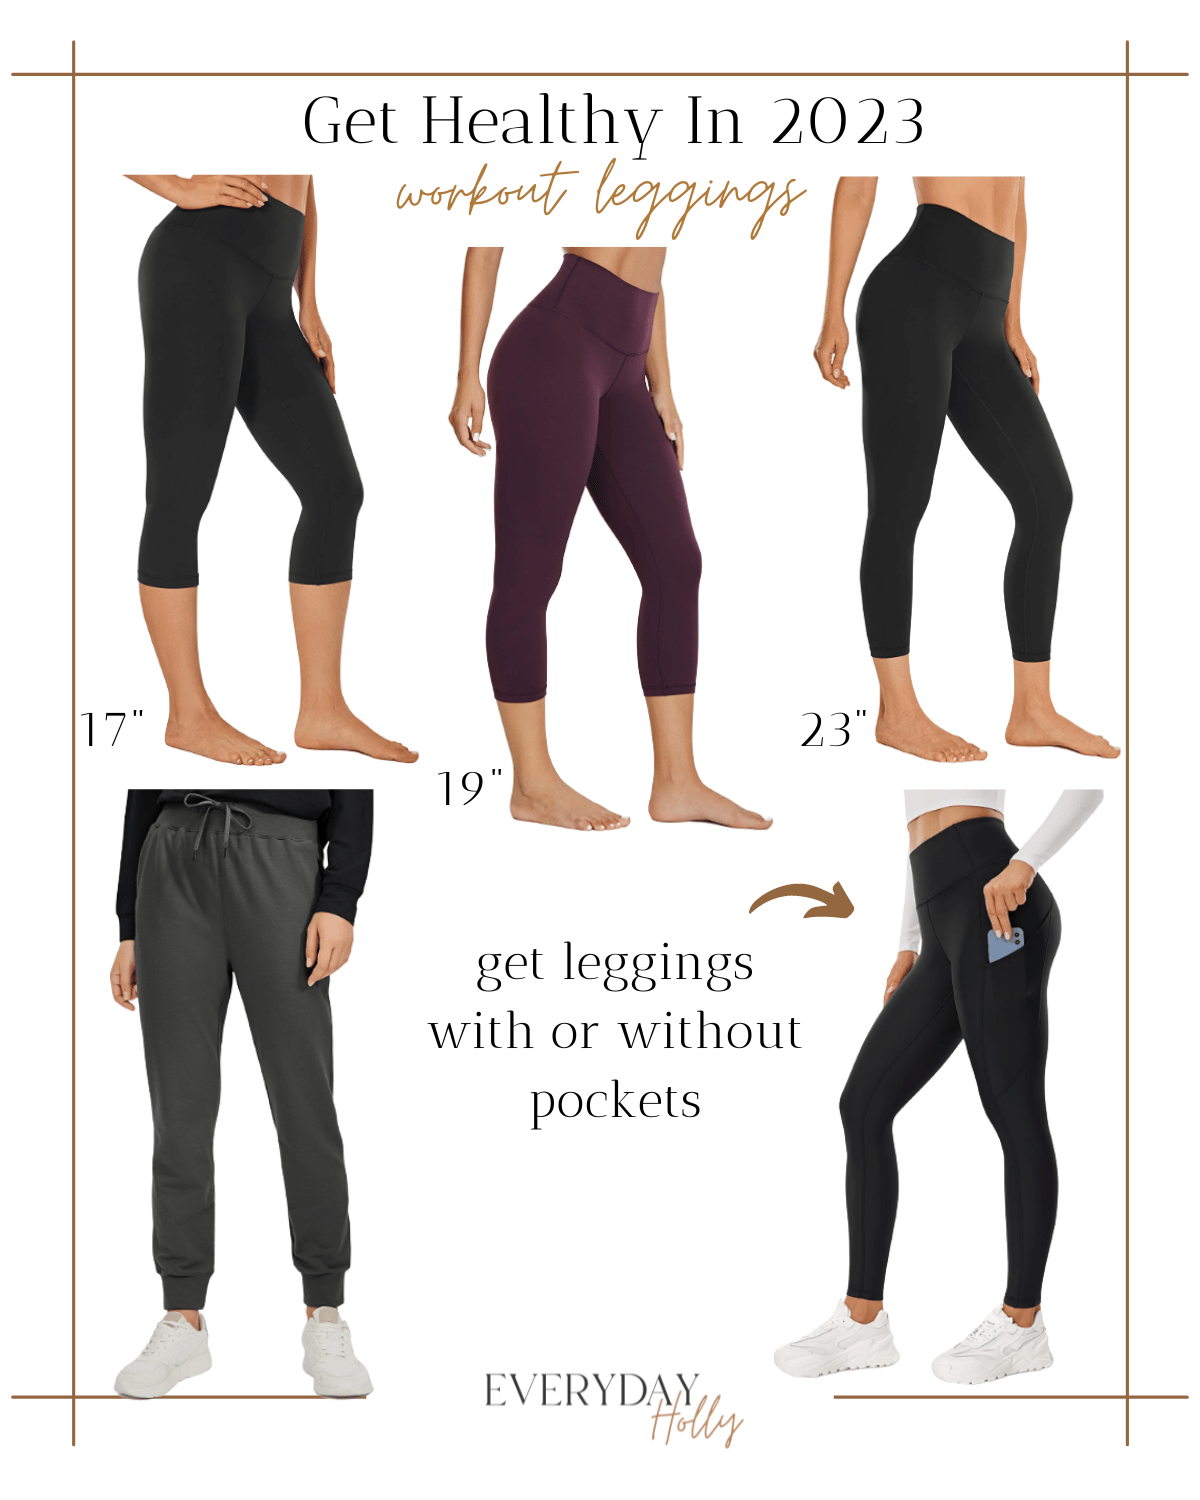 workout leggings, healthy living, get healthy in 2023, leggings, joggers. leggings with and without pockets 